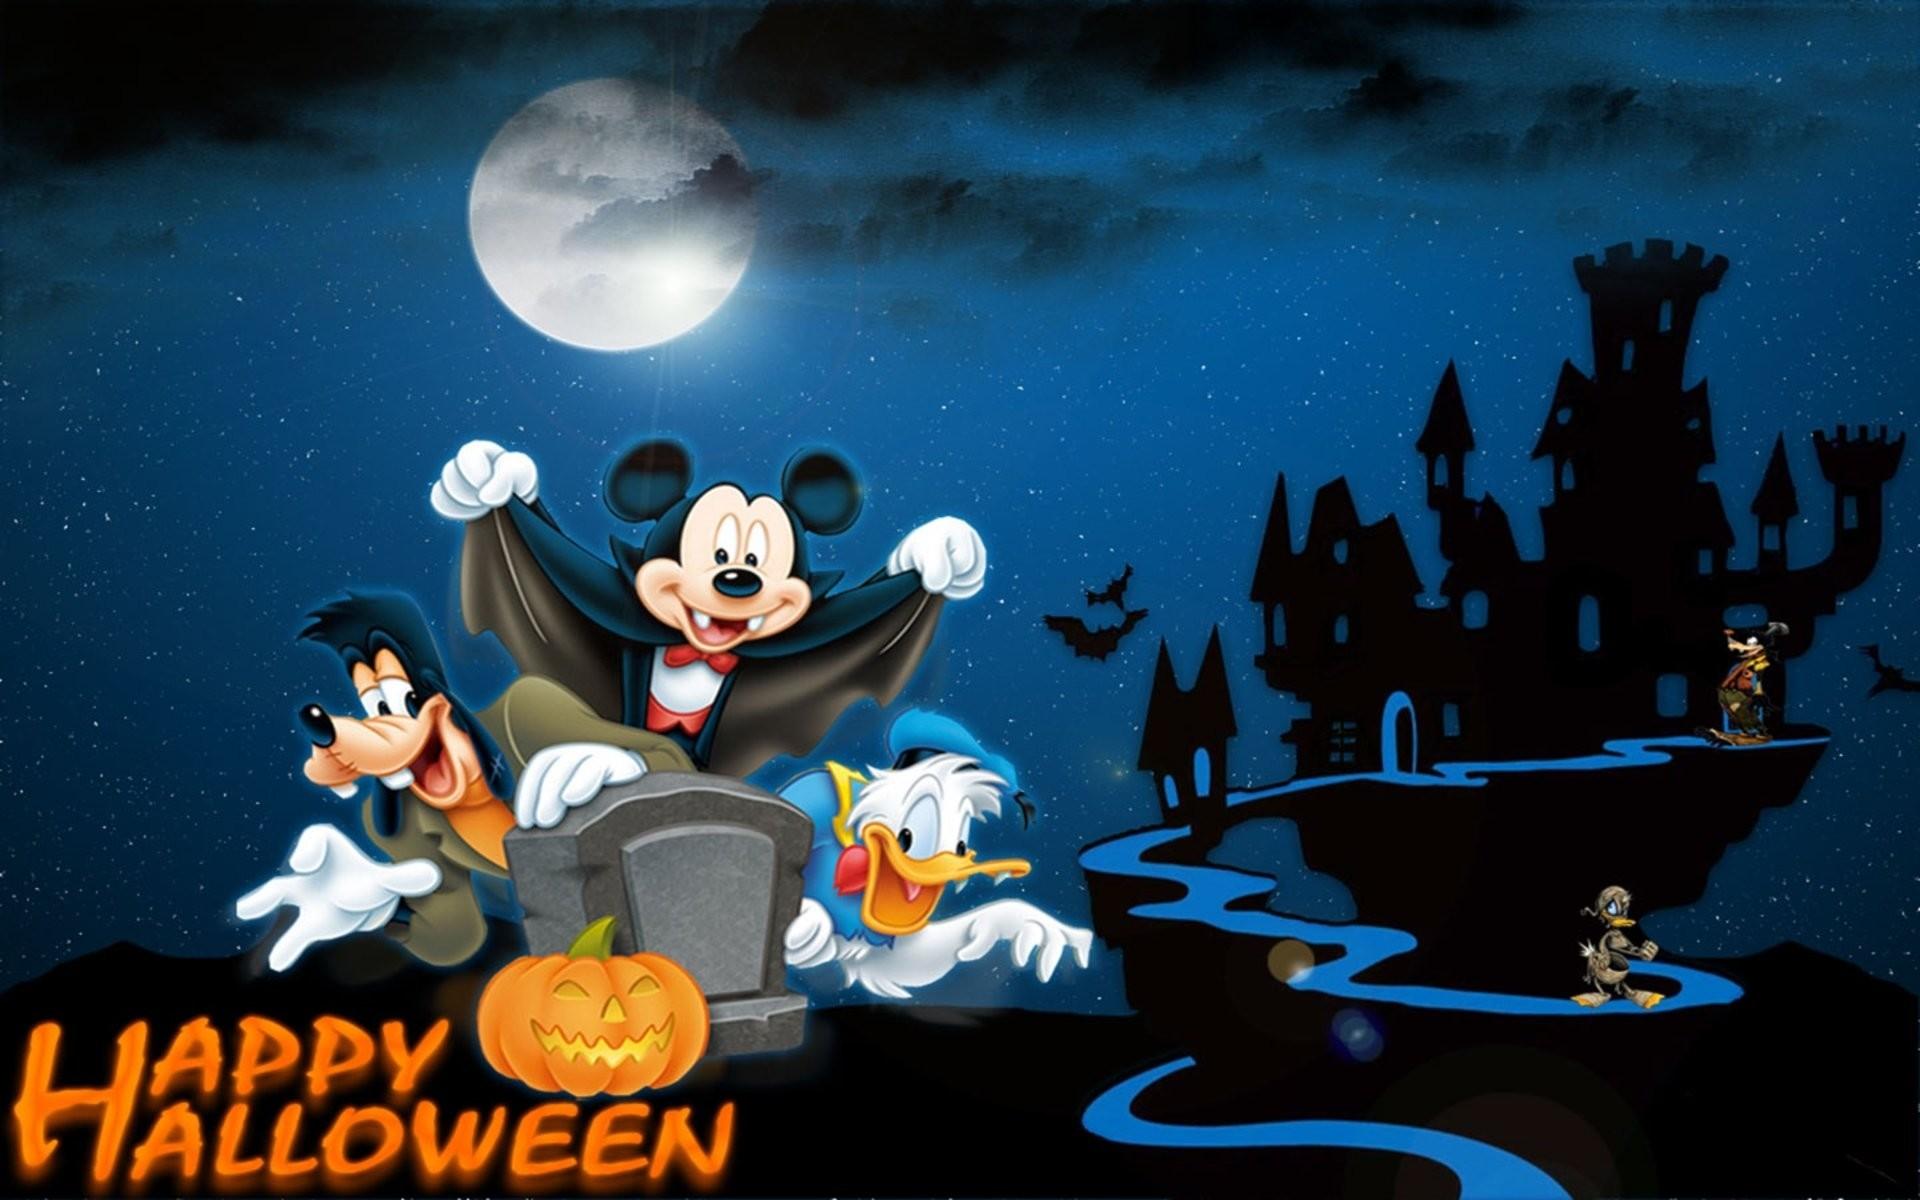 Scary Mickey Mouse Wallpapers - Wallpaper Cave